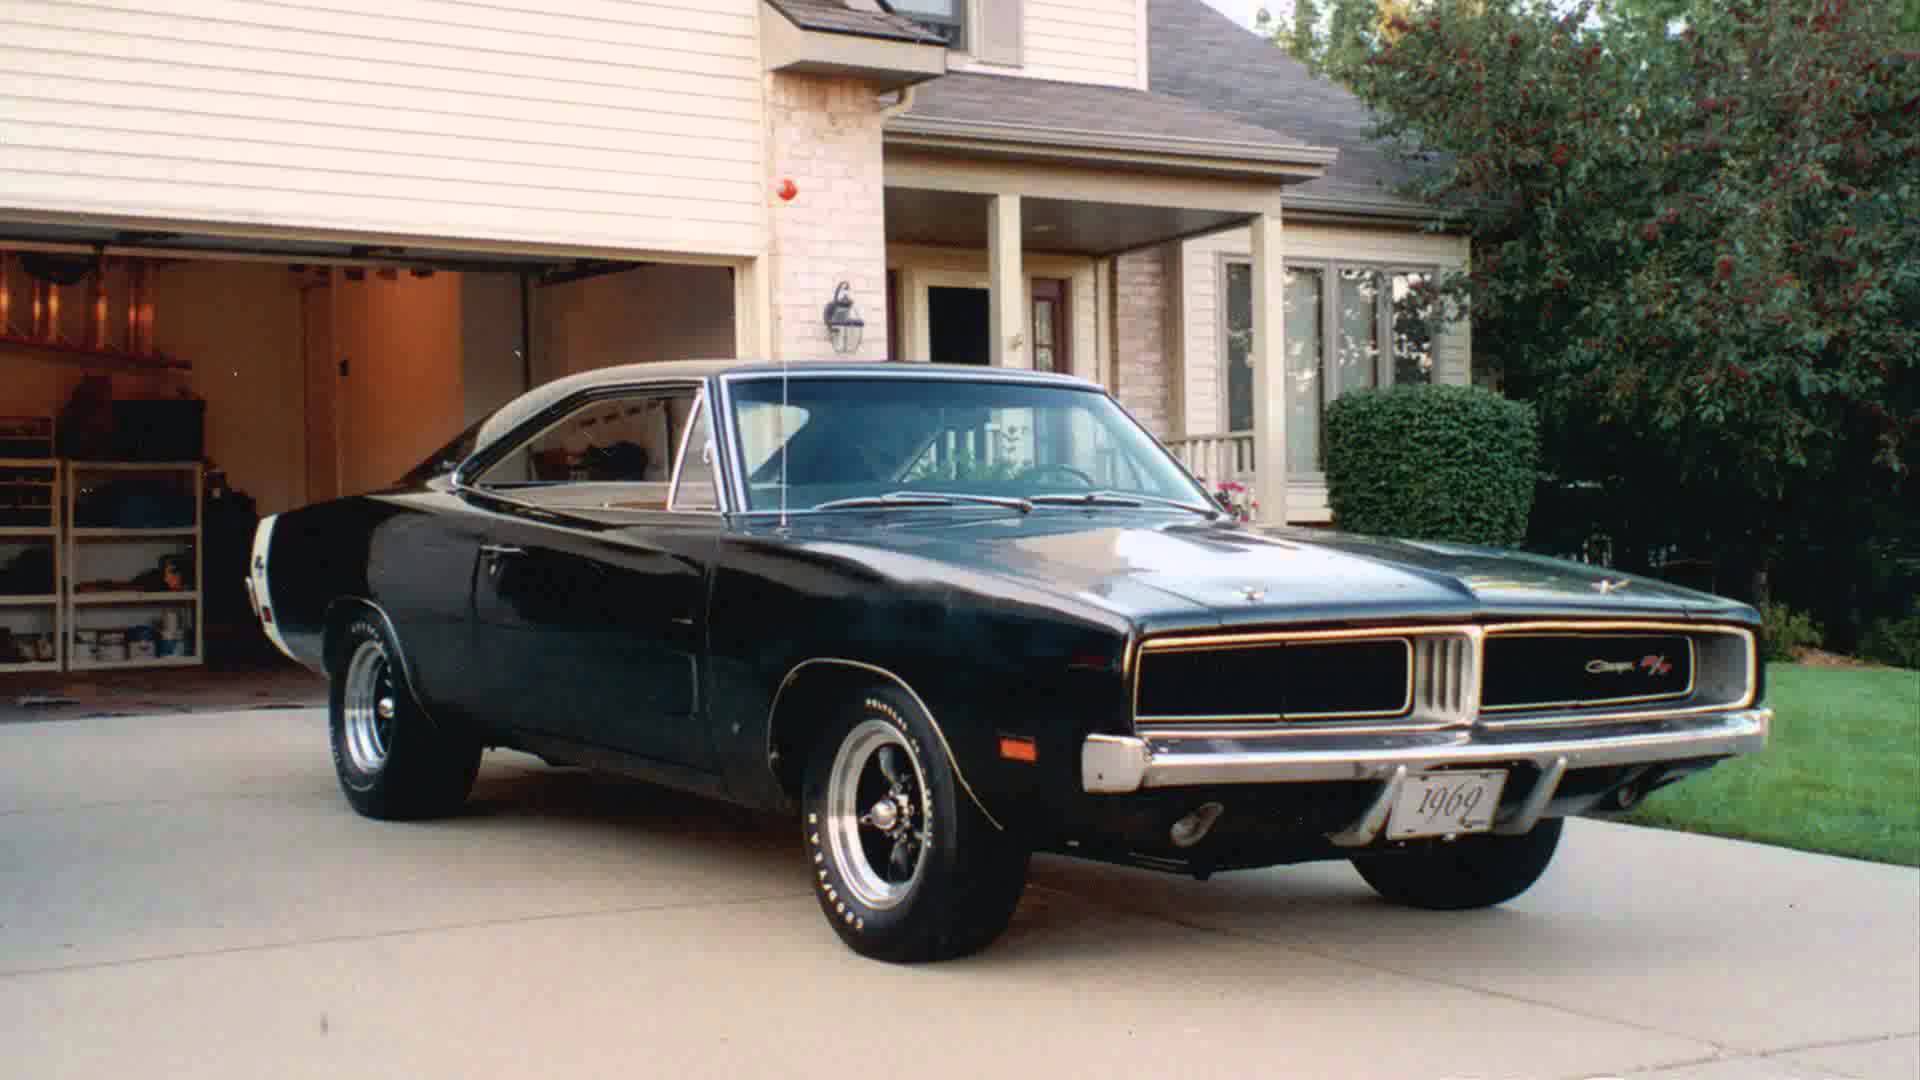 Dodge Charger RT Backgrounds, Compatible - PC, Mobile, Gadgets| 1920x1080 px